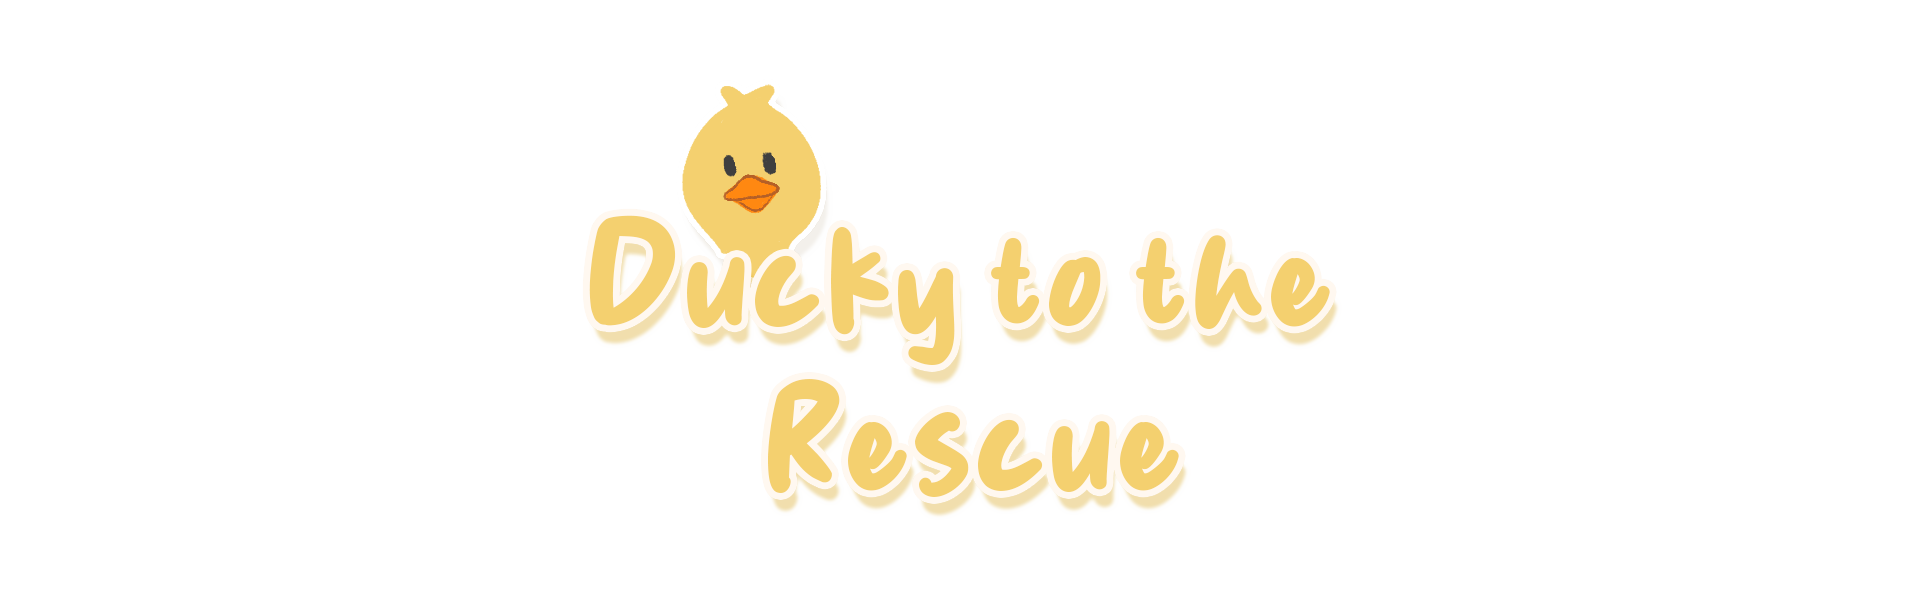 Ducky to the rescue